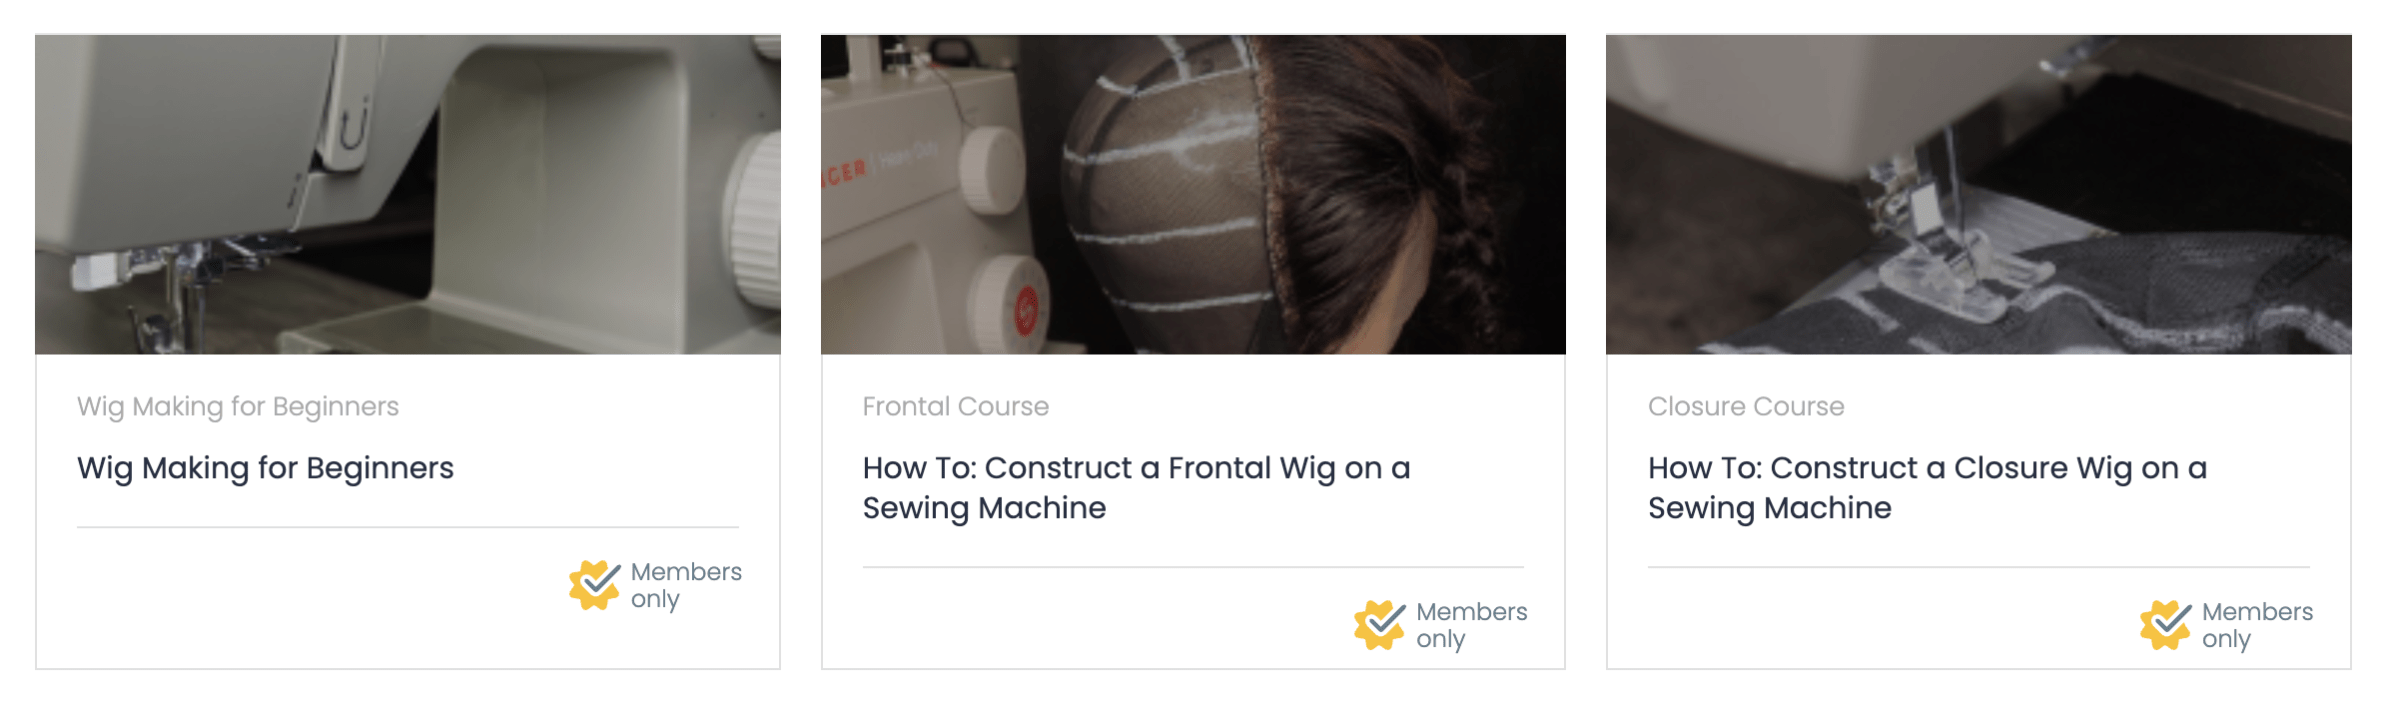 wig making courses, online wig making class, how to make a wig on a sewing machine